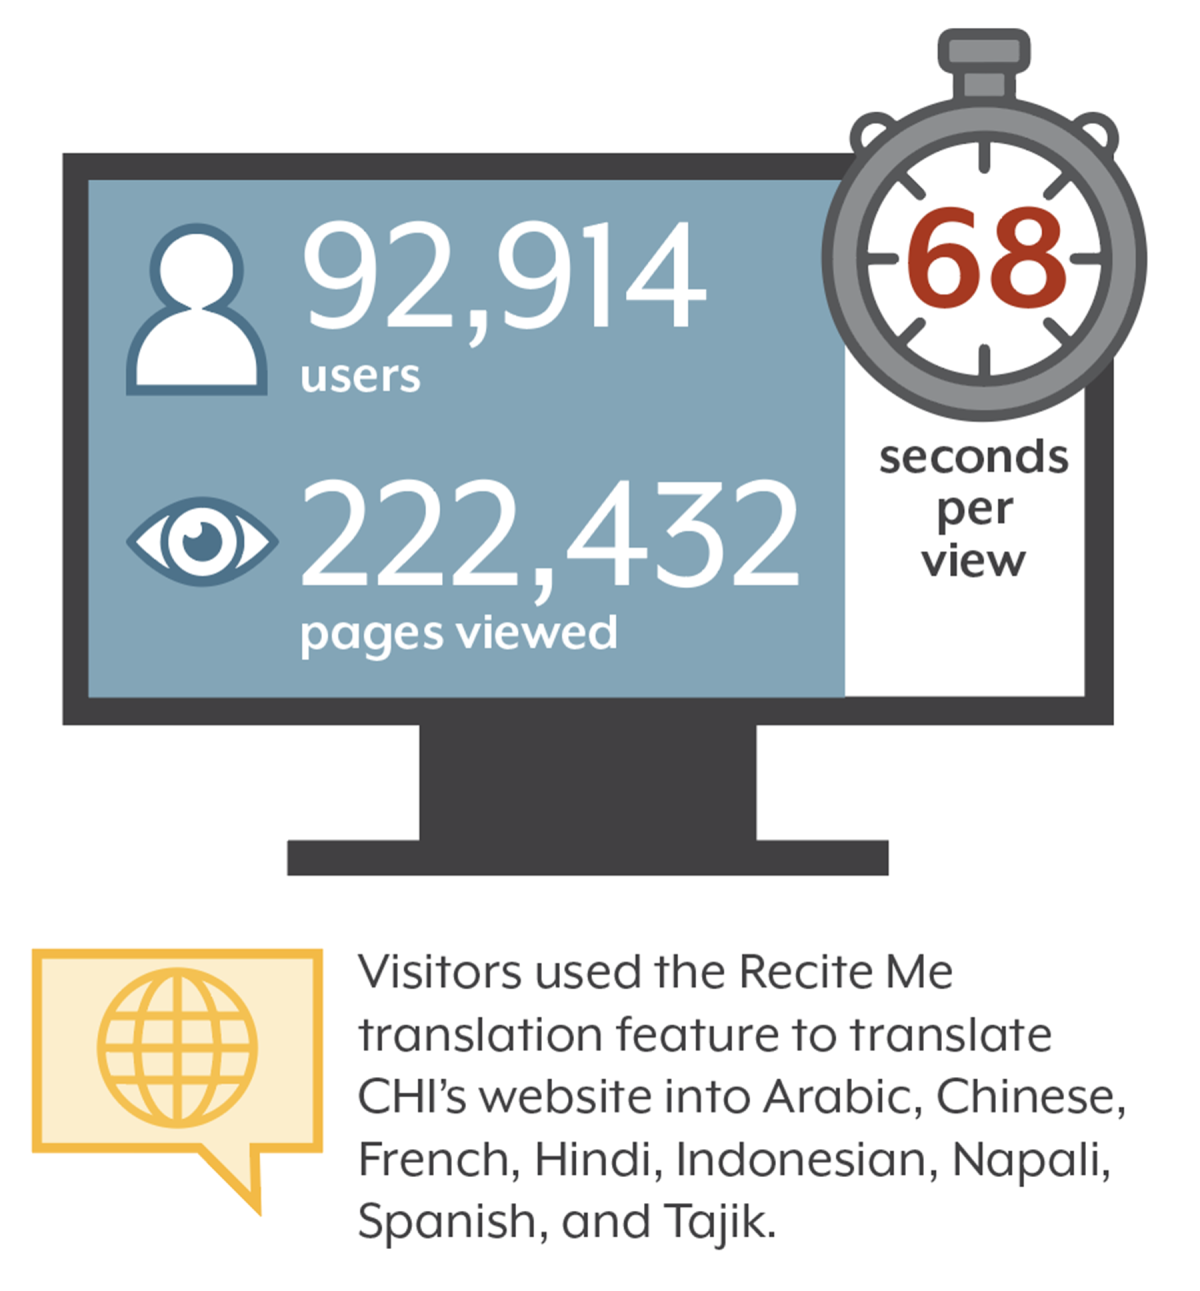 graphic that shows CHI website traffic in 2023: 92,914 users, 222,432 pages viewed, 68 seconds per view. Viewers used the Recite Me translation feature to translate CHI's website into Arabic, Chinese, French, Hindi, Indonesian, Nepali, Spanish, and Tajik.